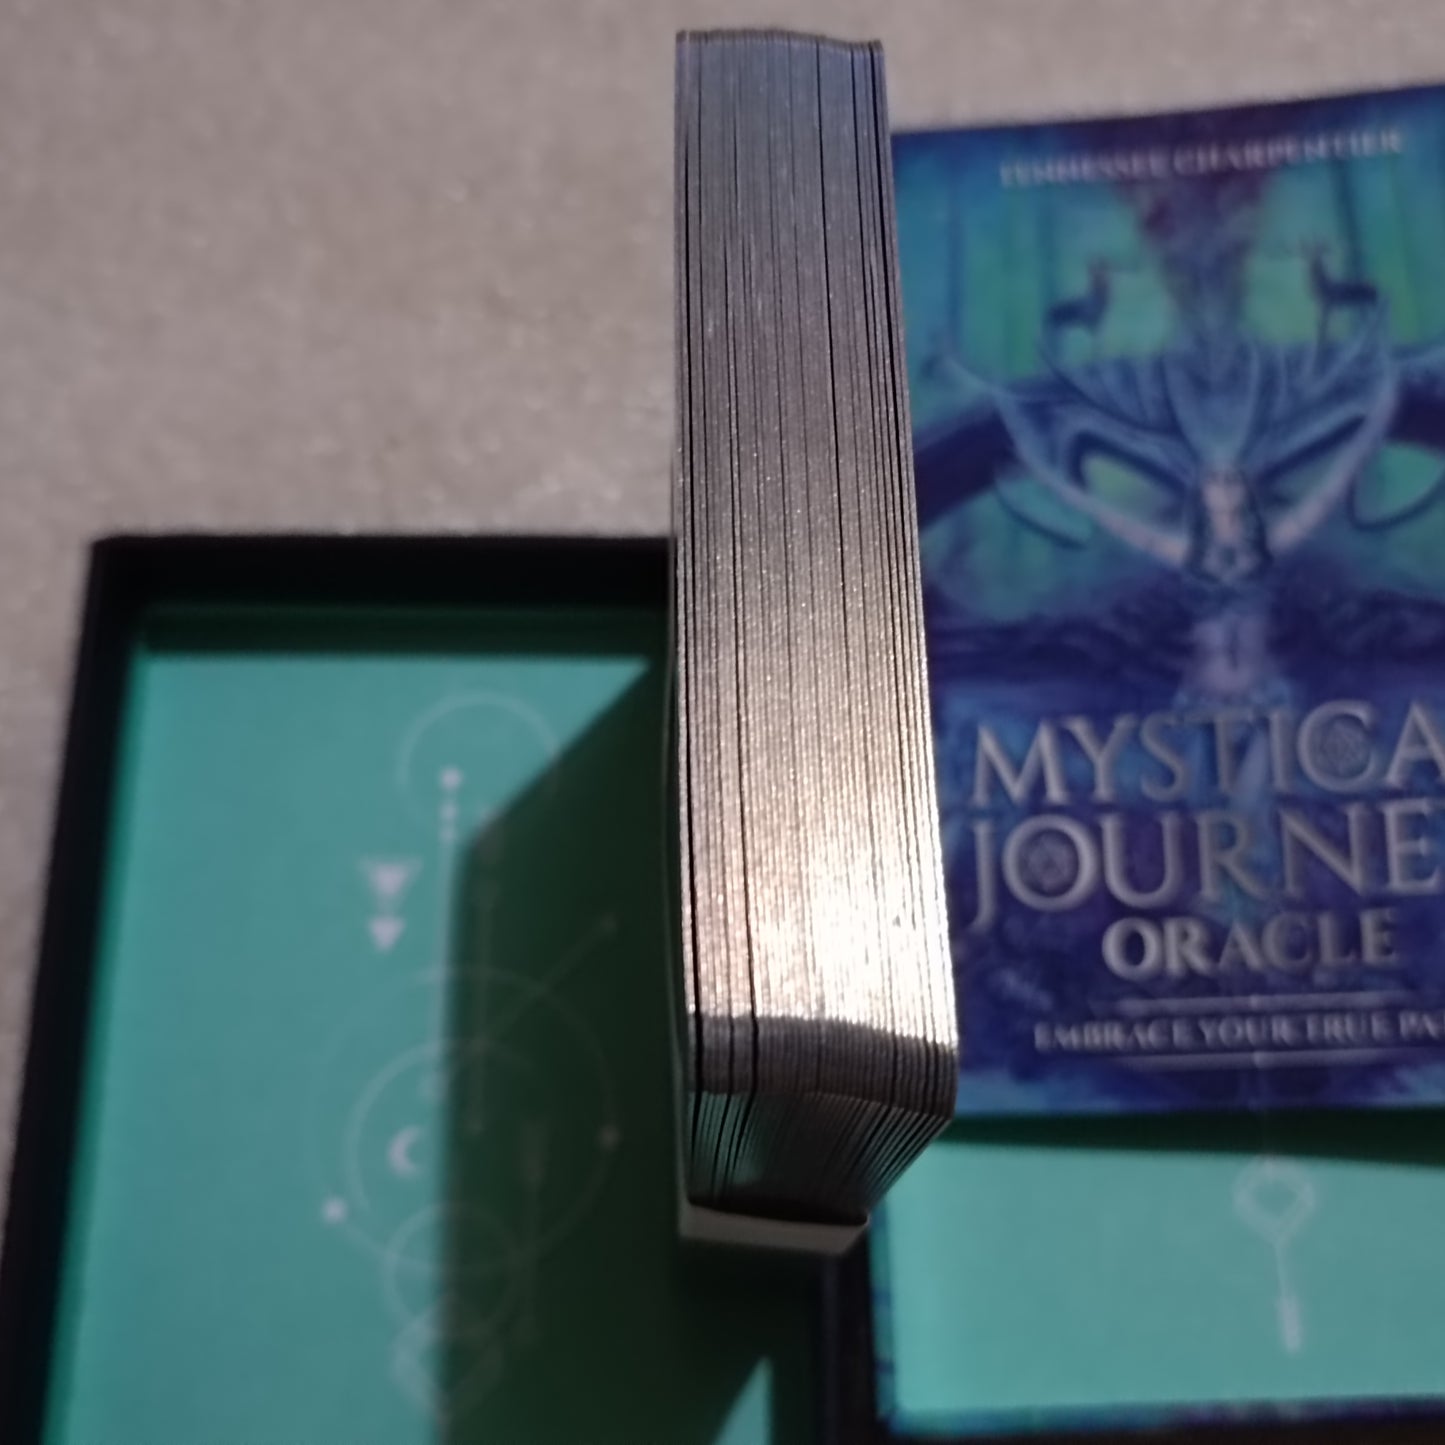 The Mystical Journey Oracle (PRE-LOVED)